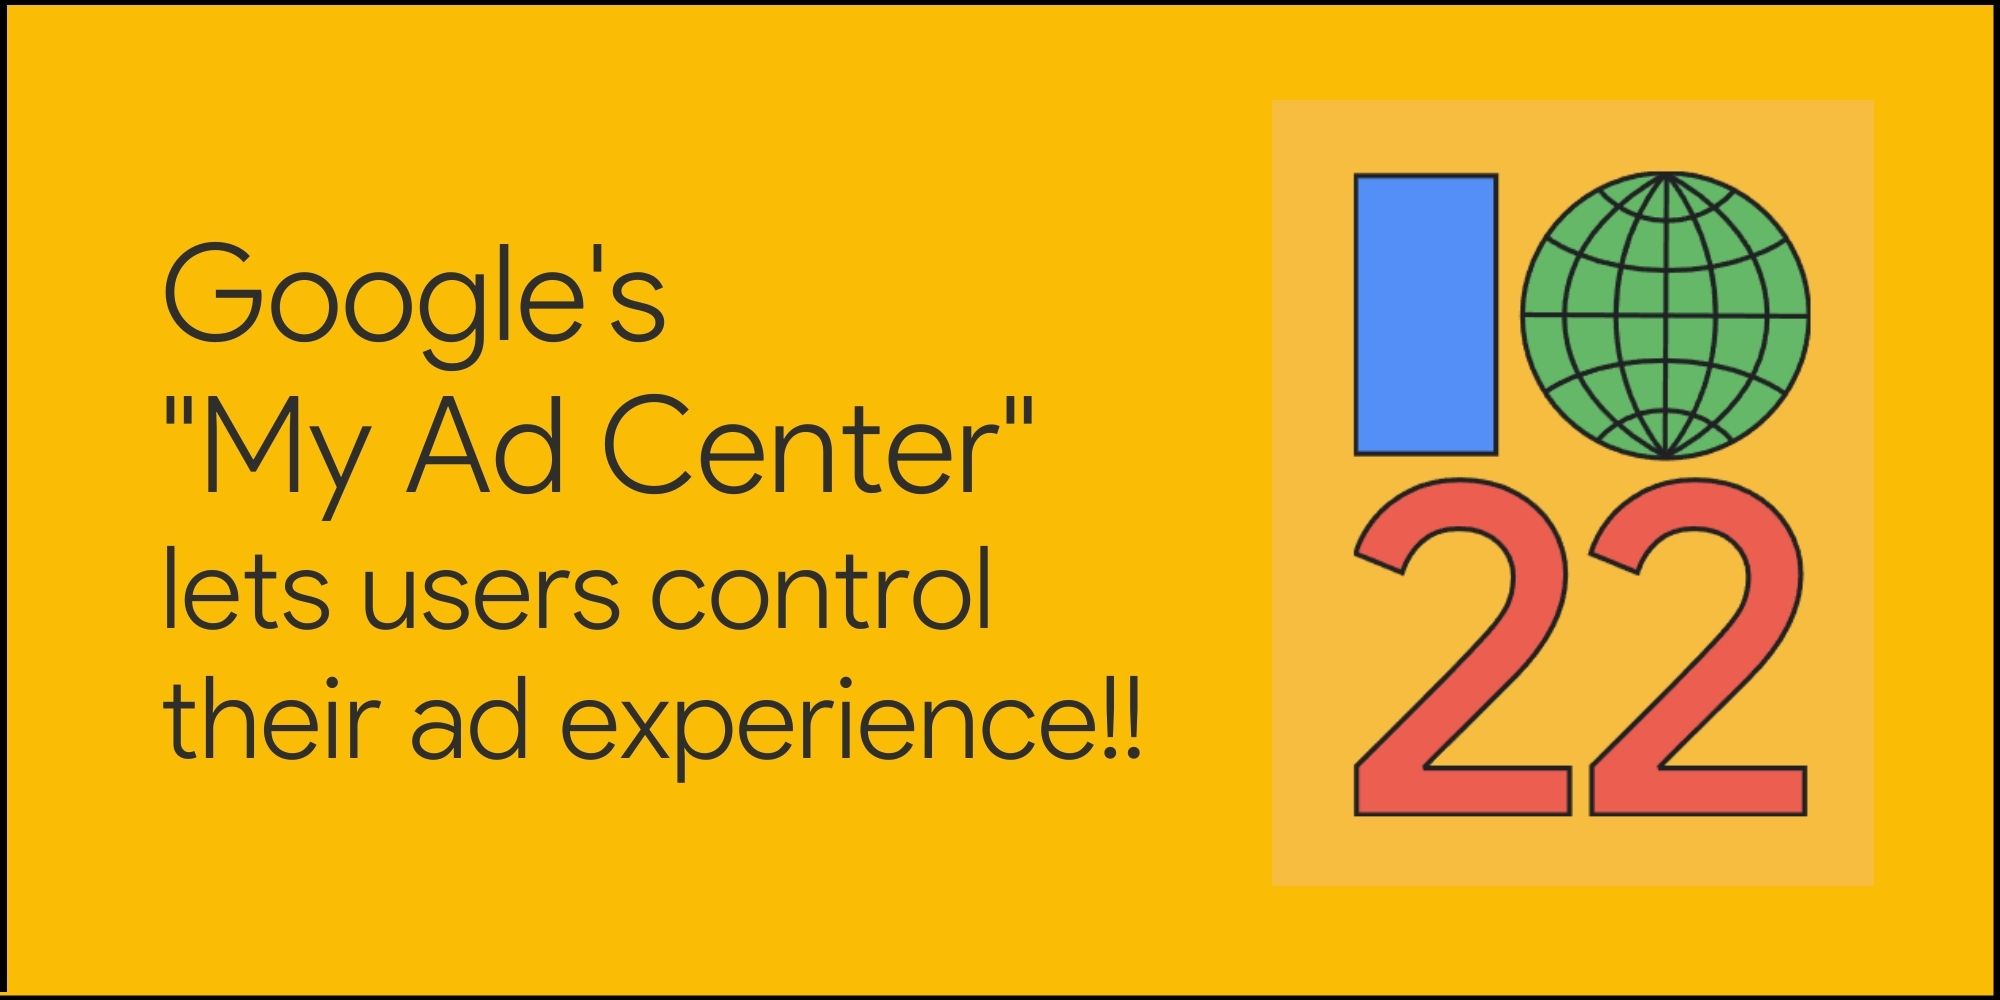 Add a Google's My Ad Center lets users control their ad experience